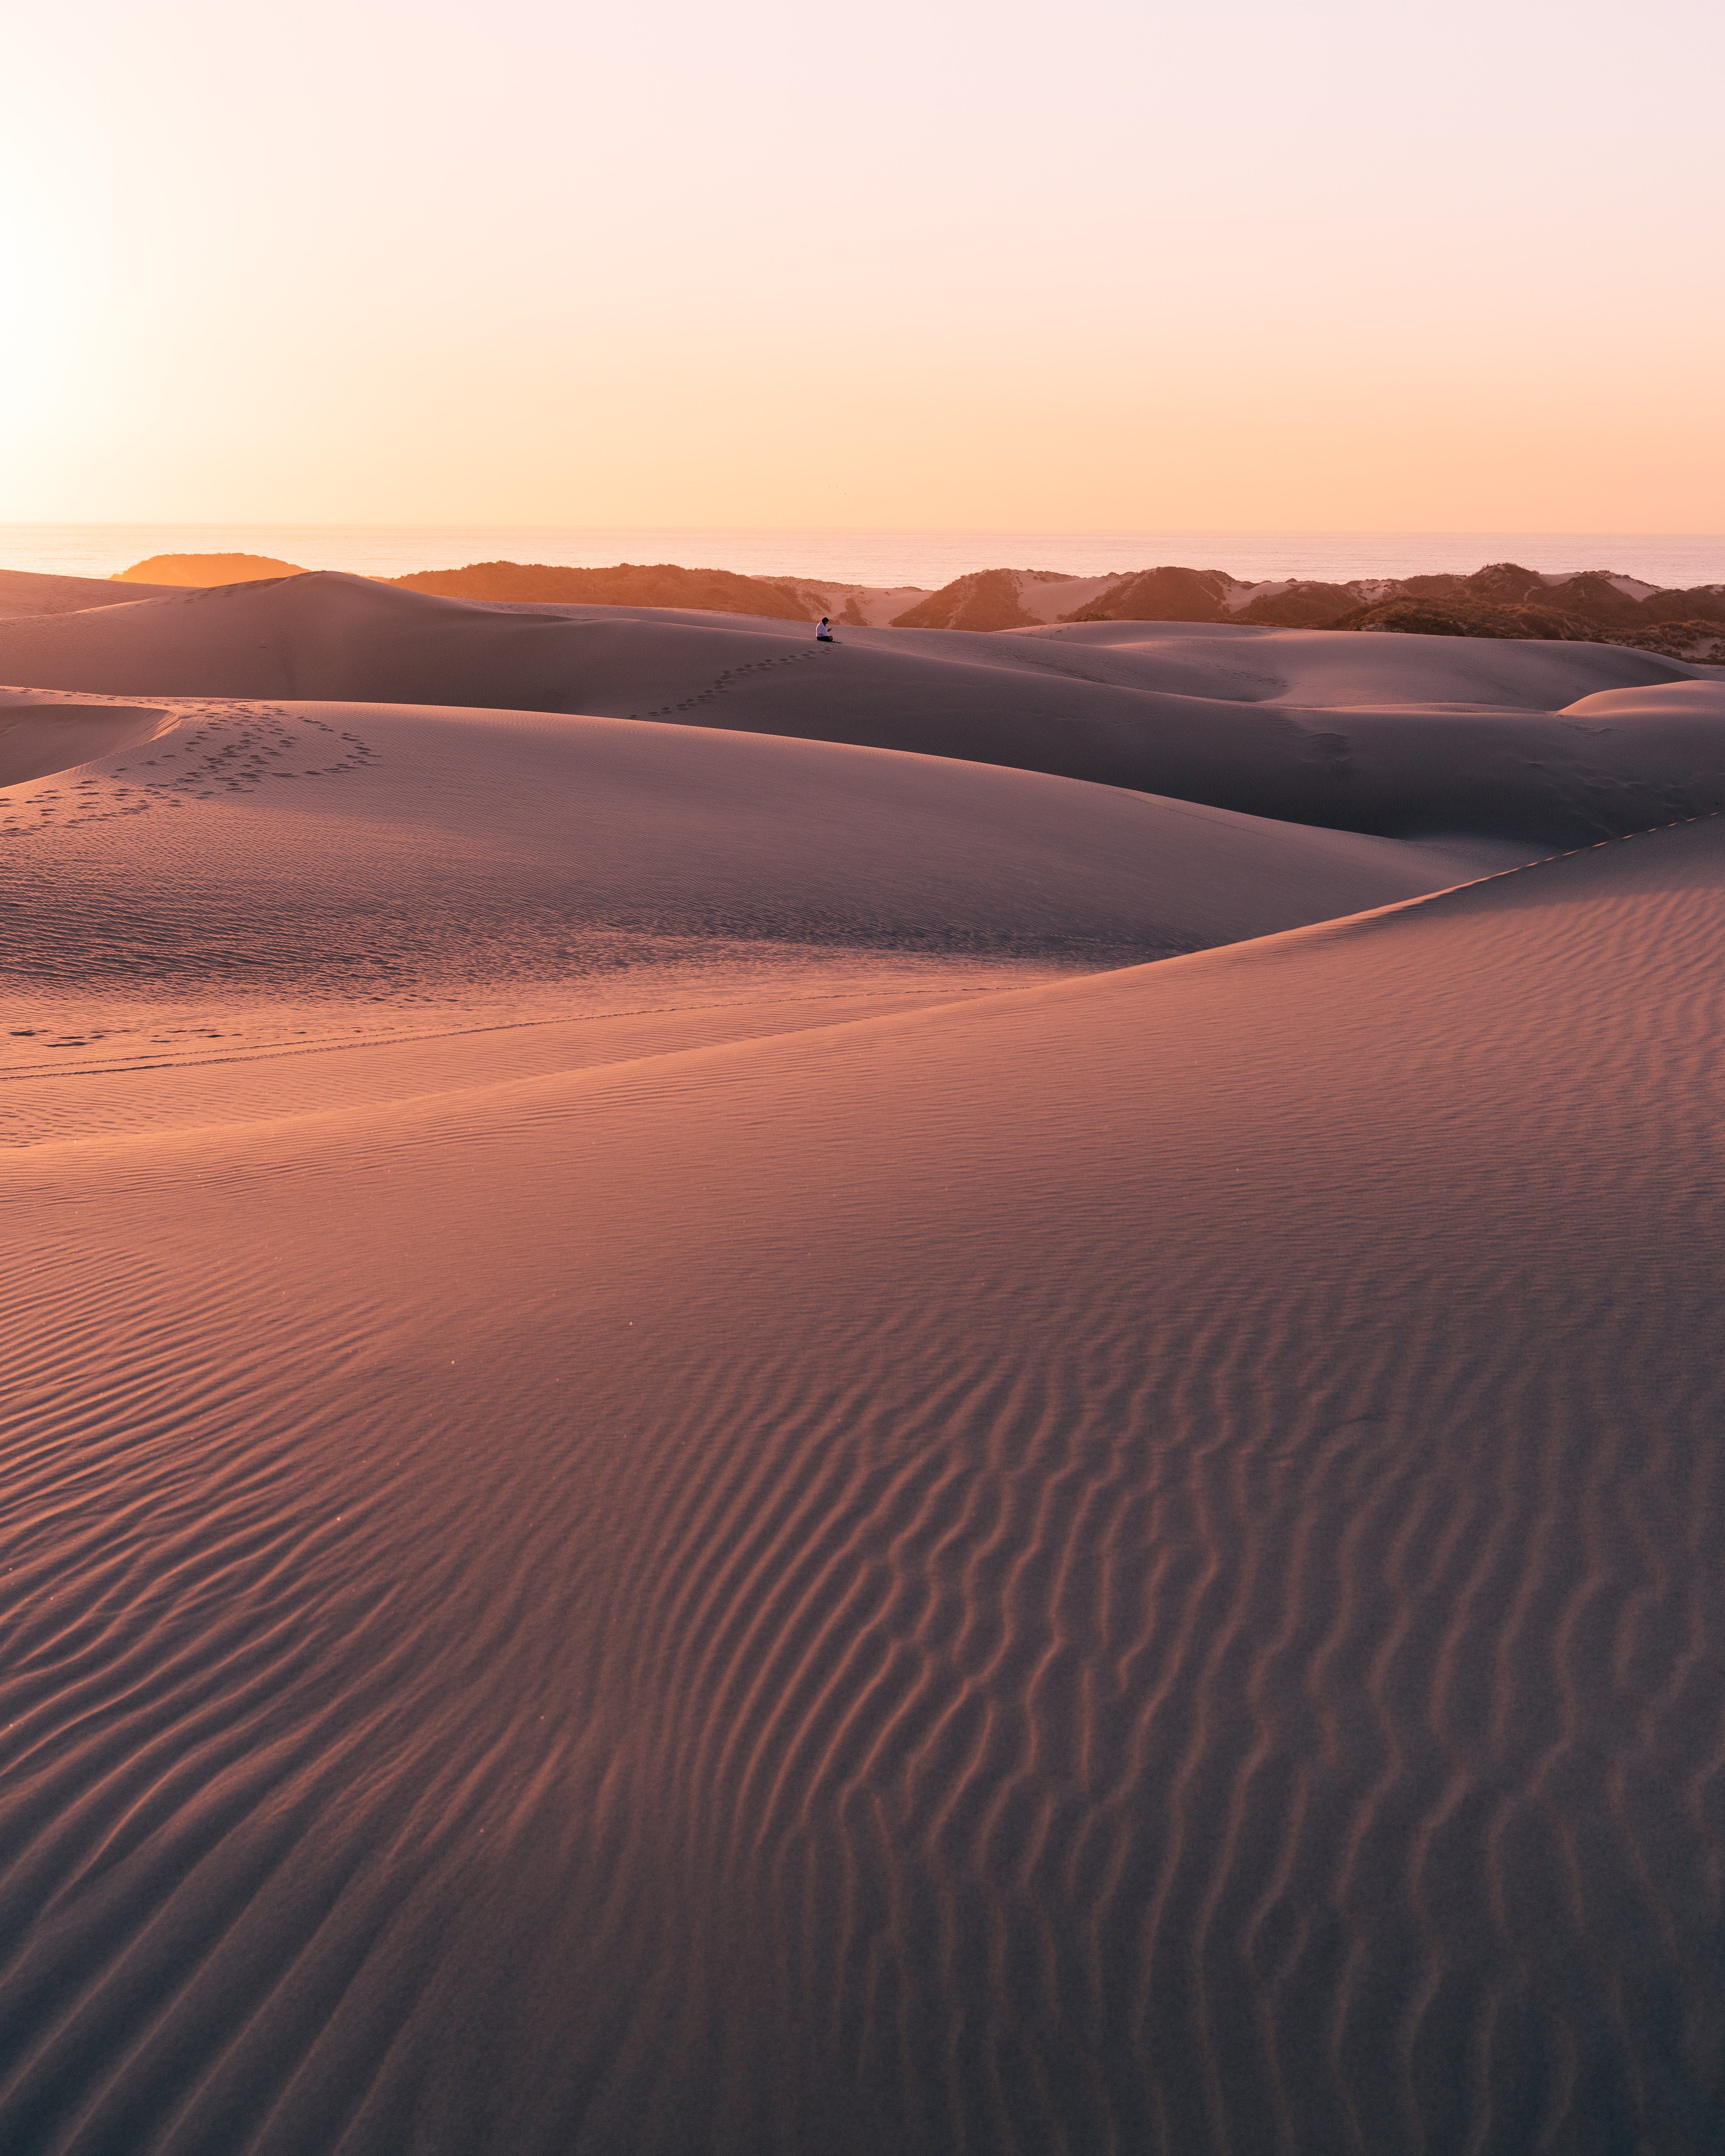 An Unsplash  photowalk at Pismo Beach Dunes hosted by 